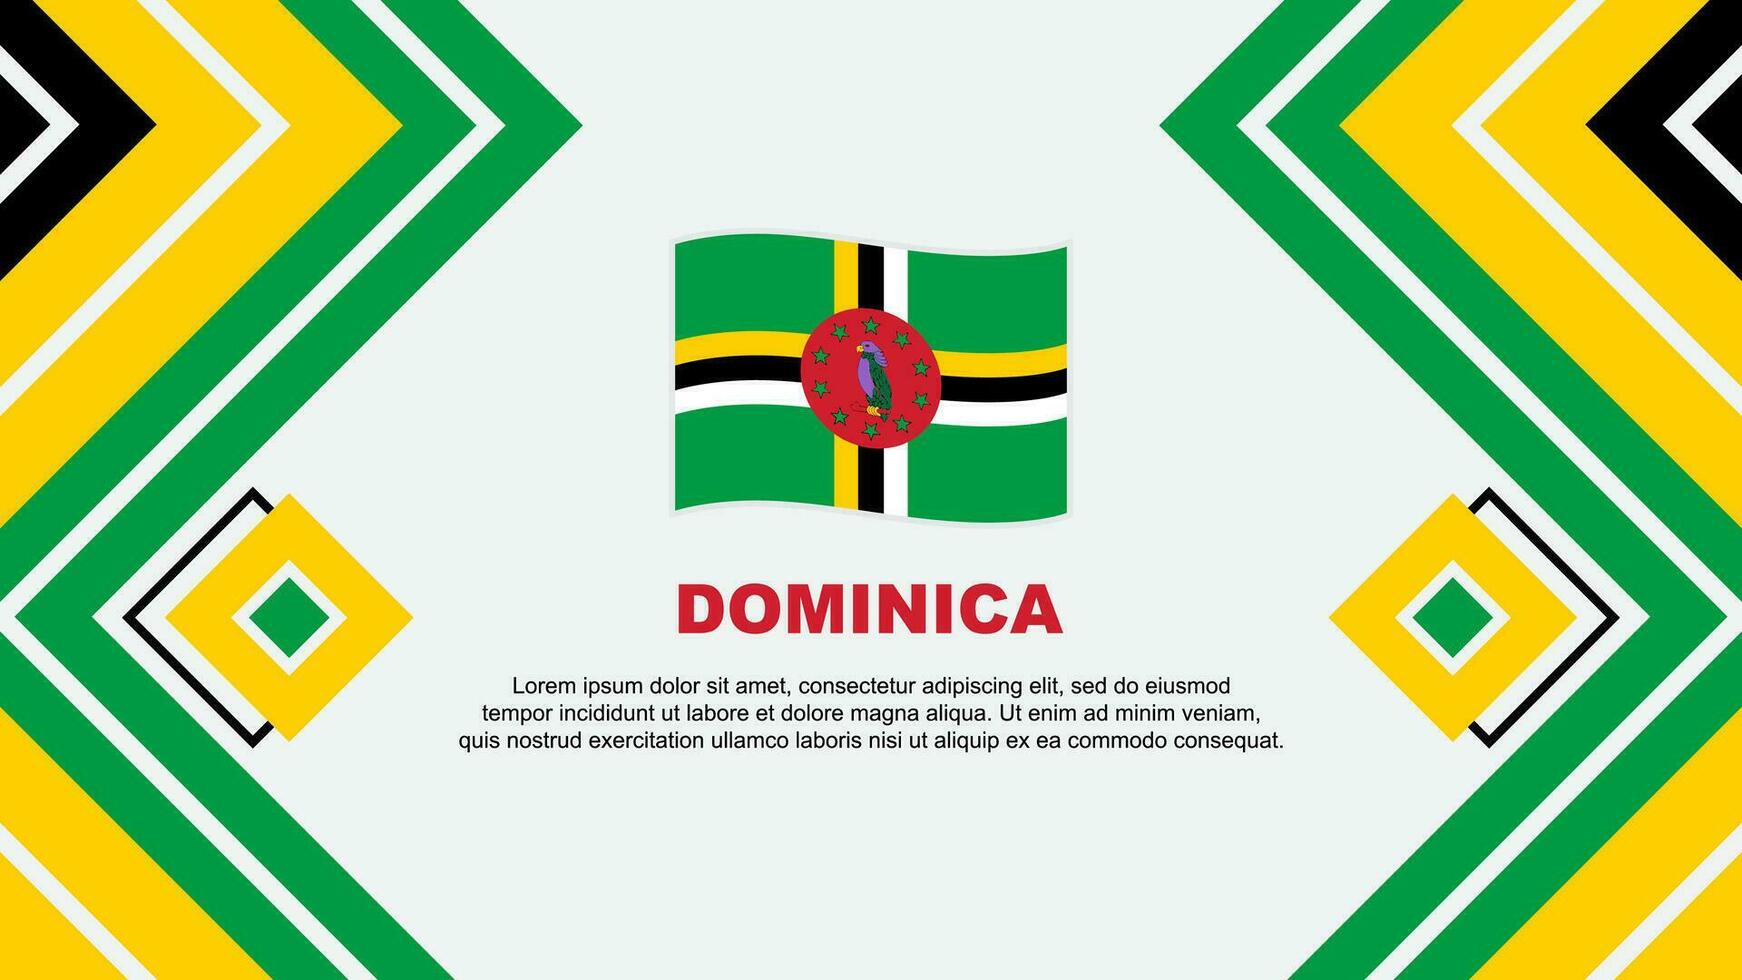 Dominica Flag Abstract Background Design Template. Dominica Independence Day Banner Wallpaper Vector Illustration. Dominica Design